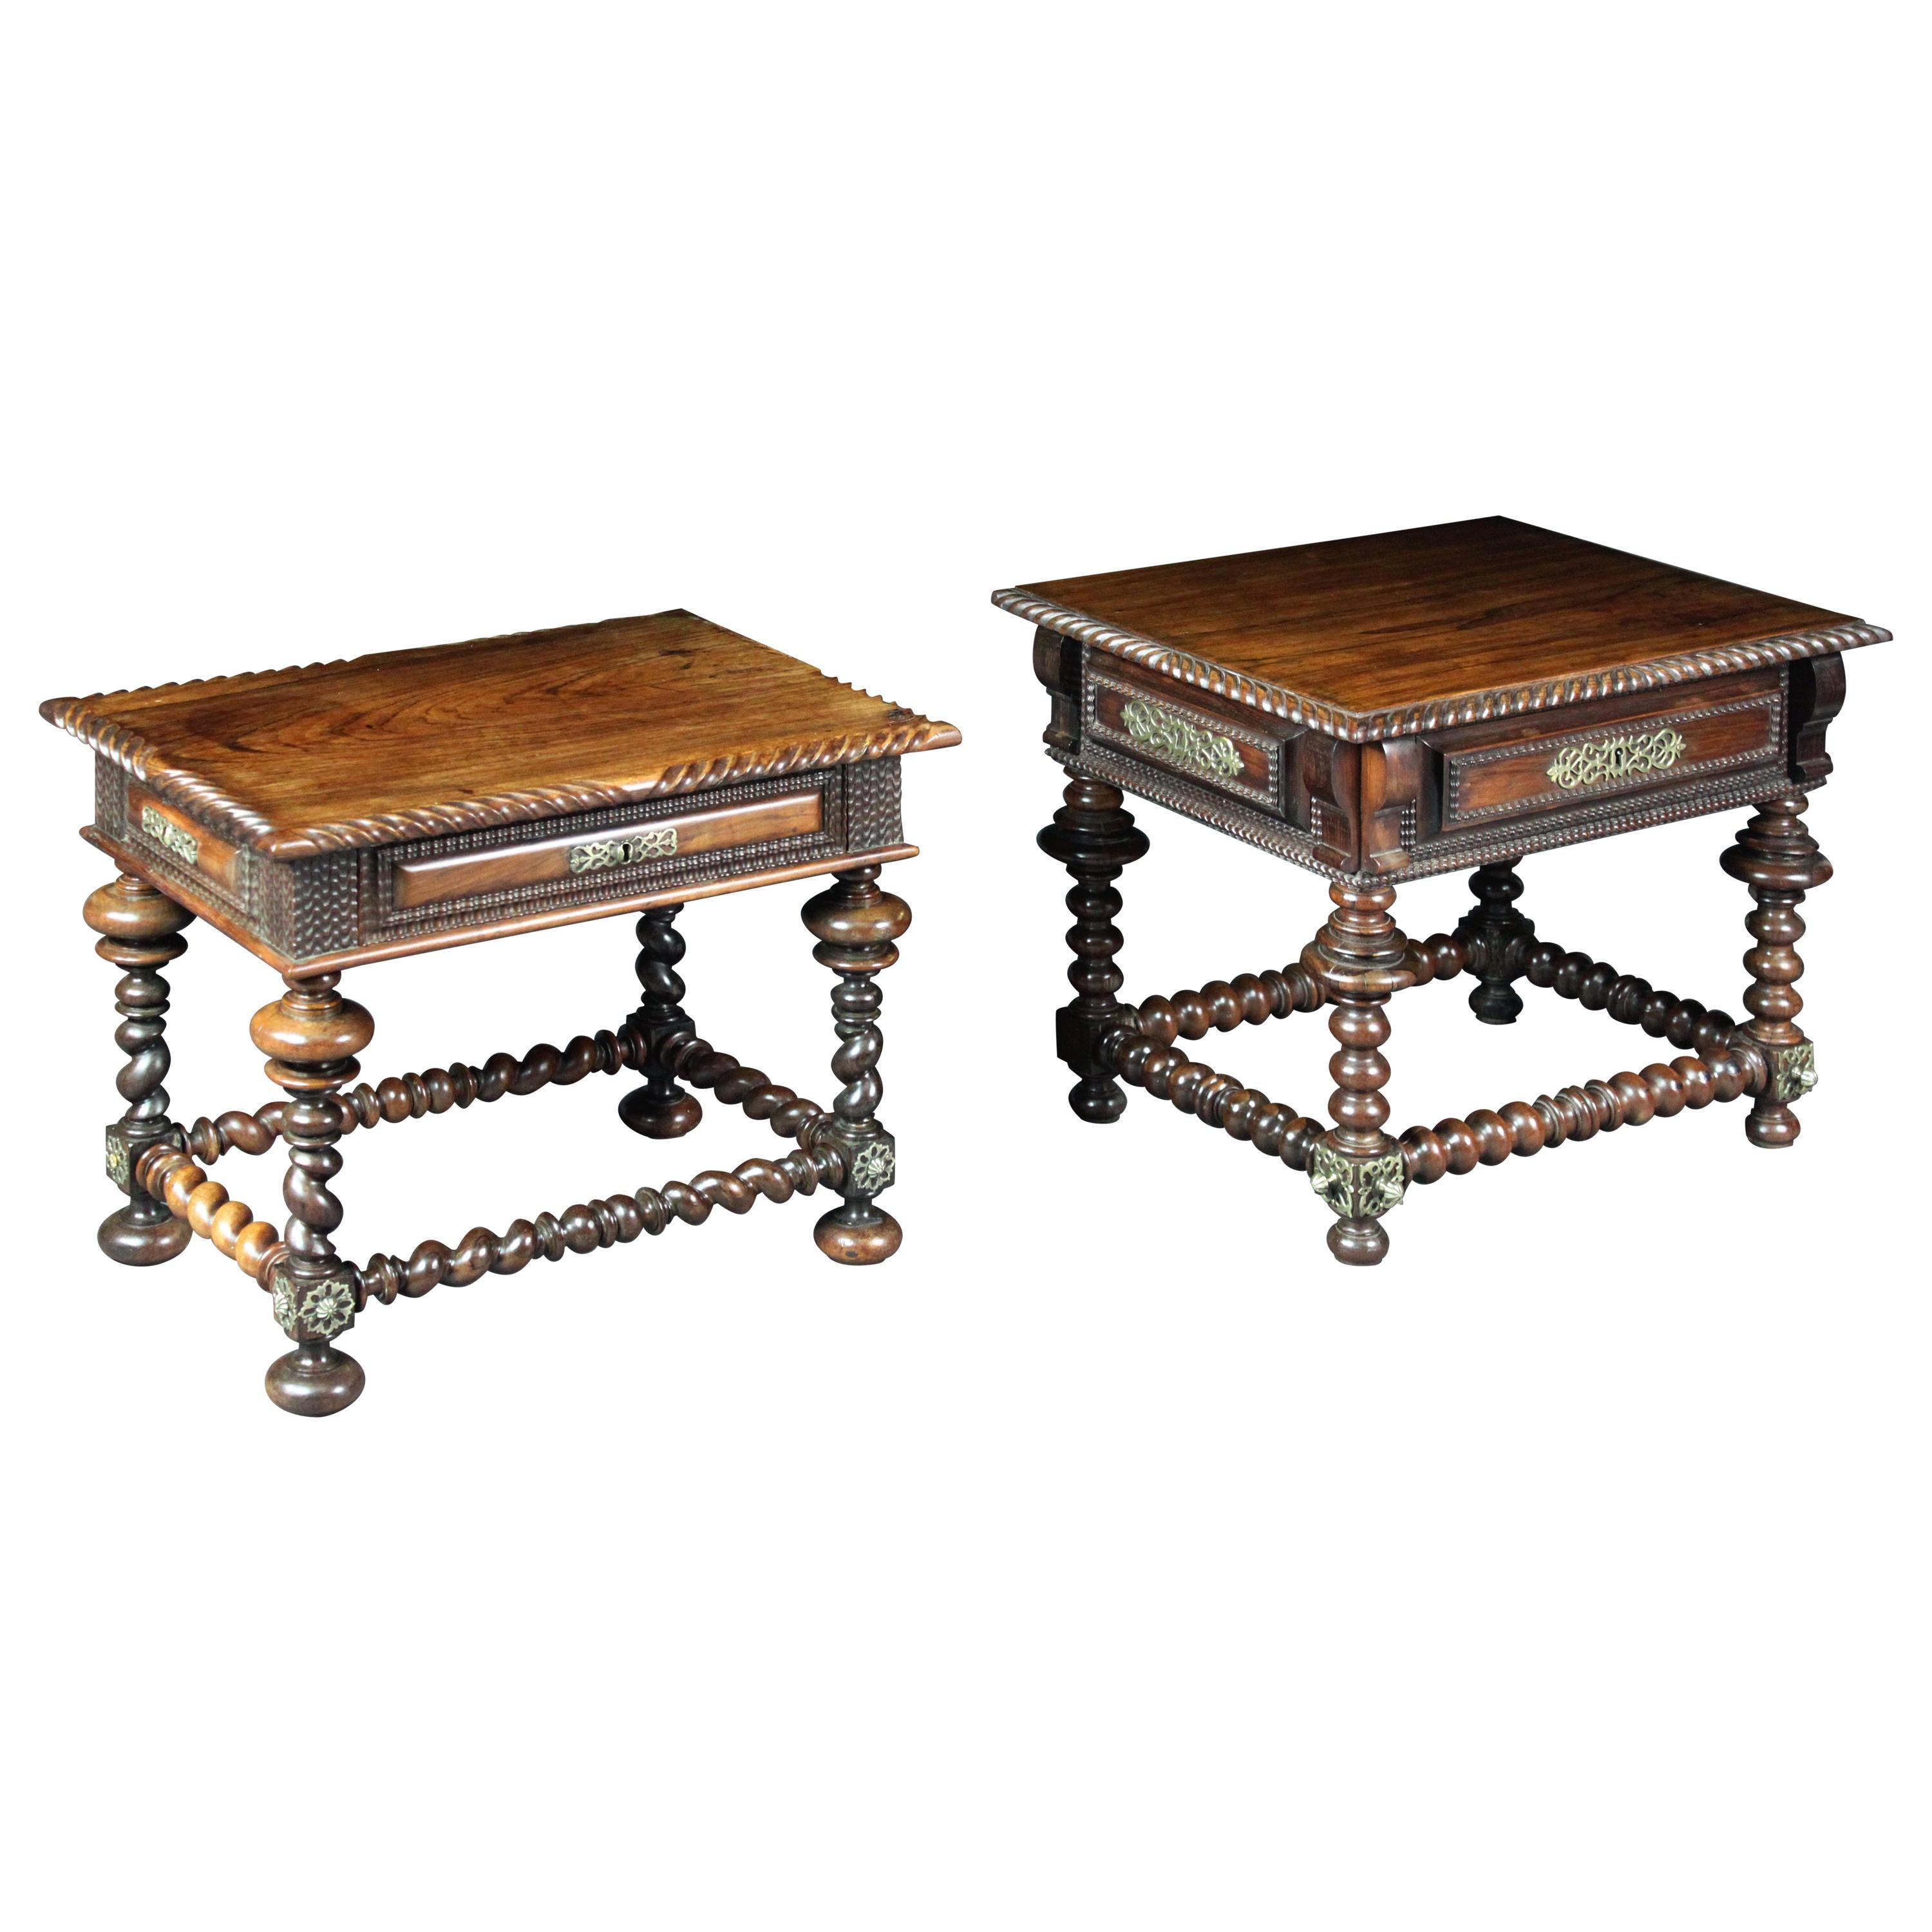 Two Portuguese Low Rosewood Tables